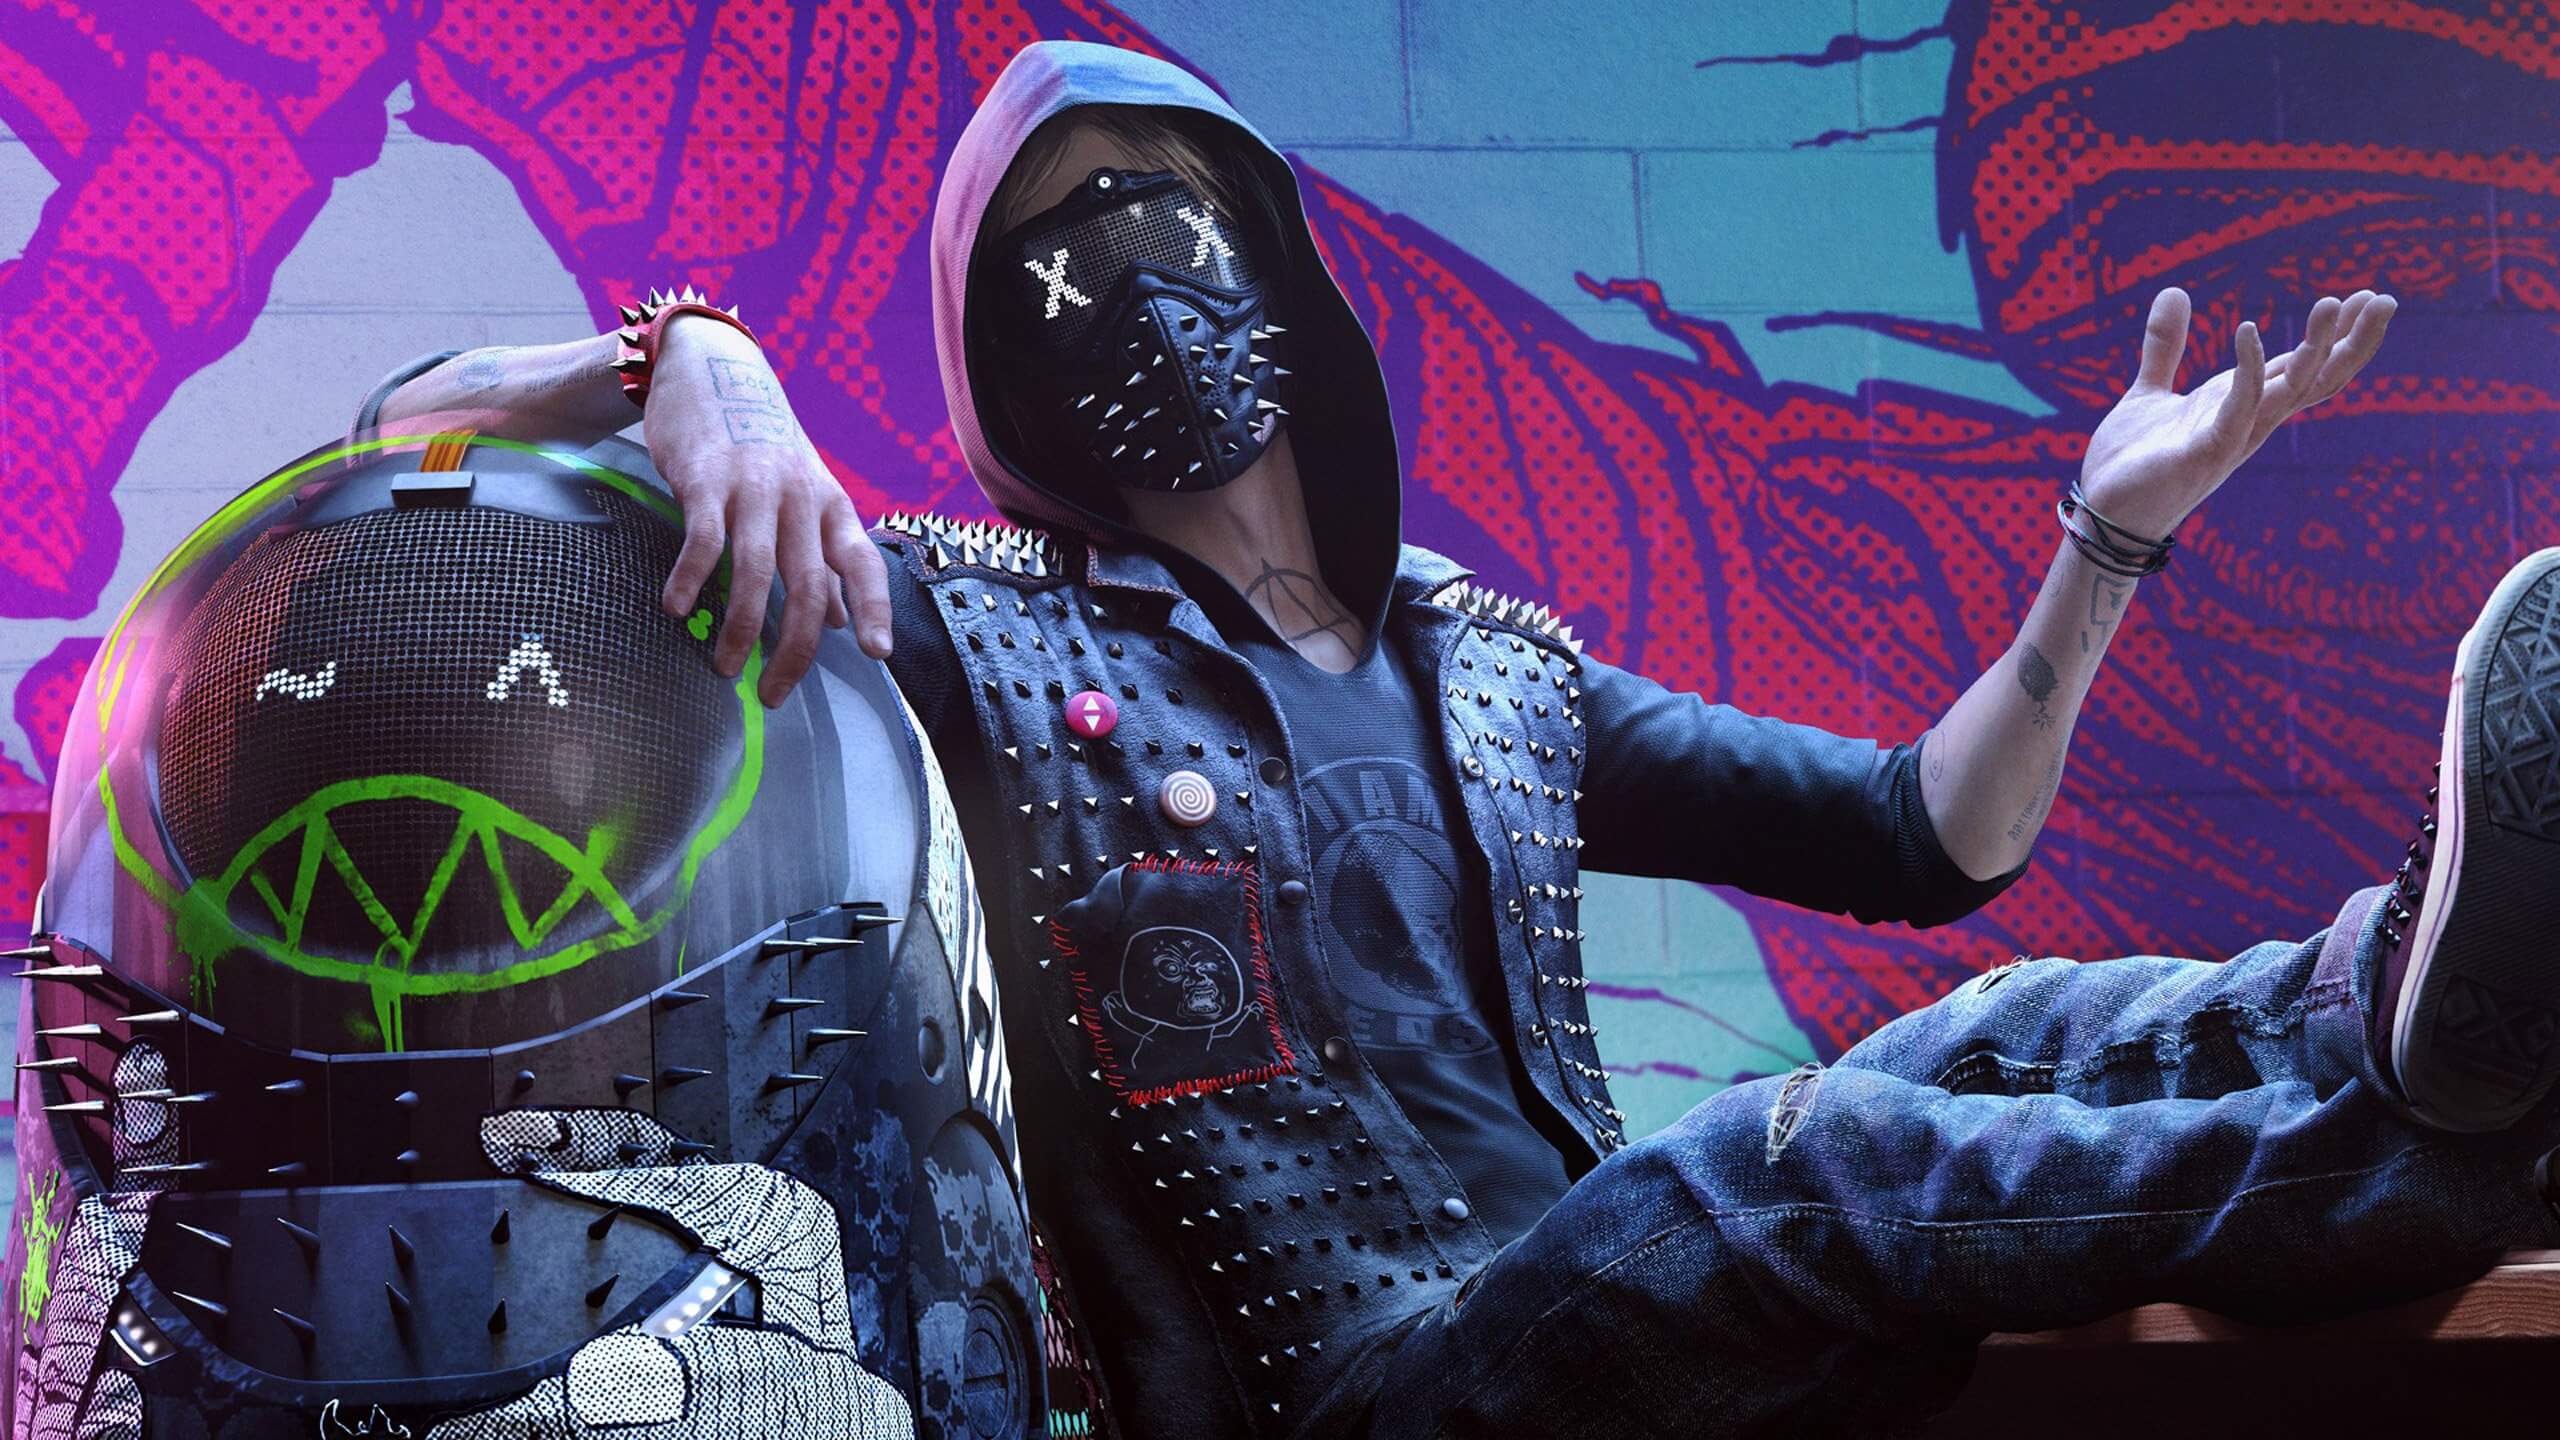 Wrench Watch Dogs 2 4k Wallpaper Gamephd